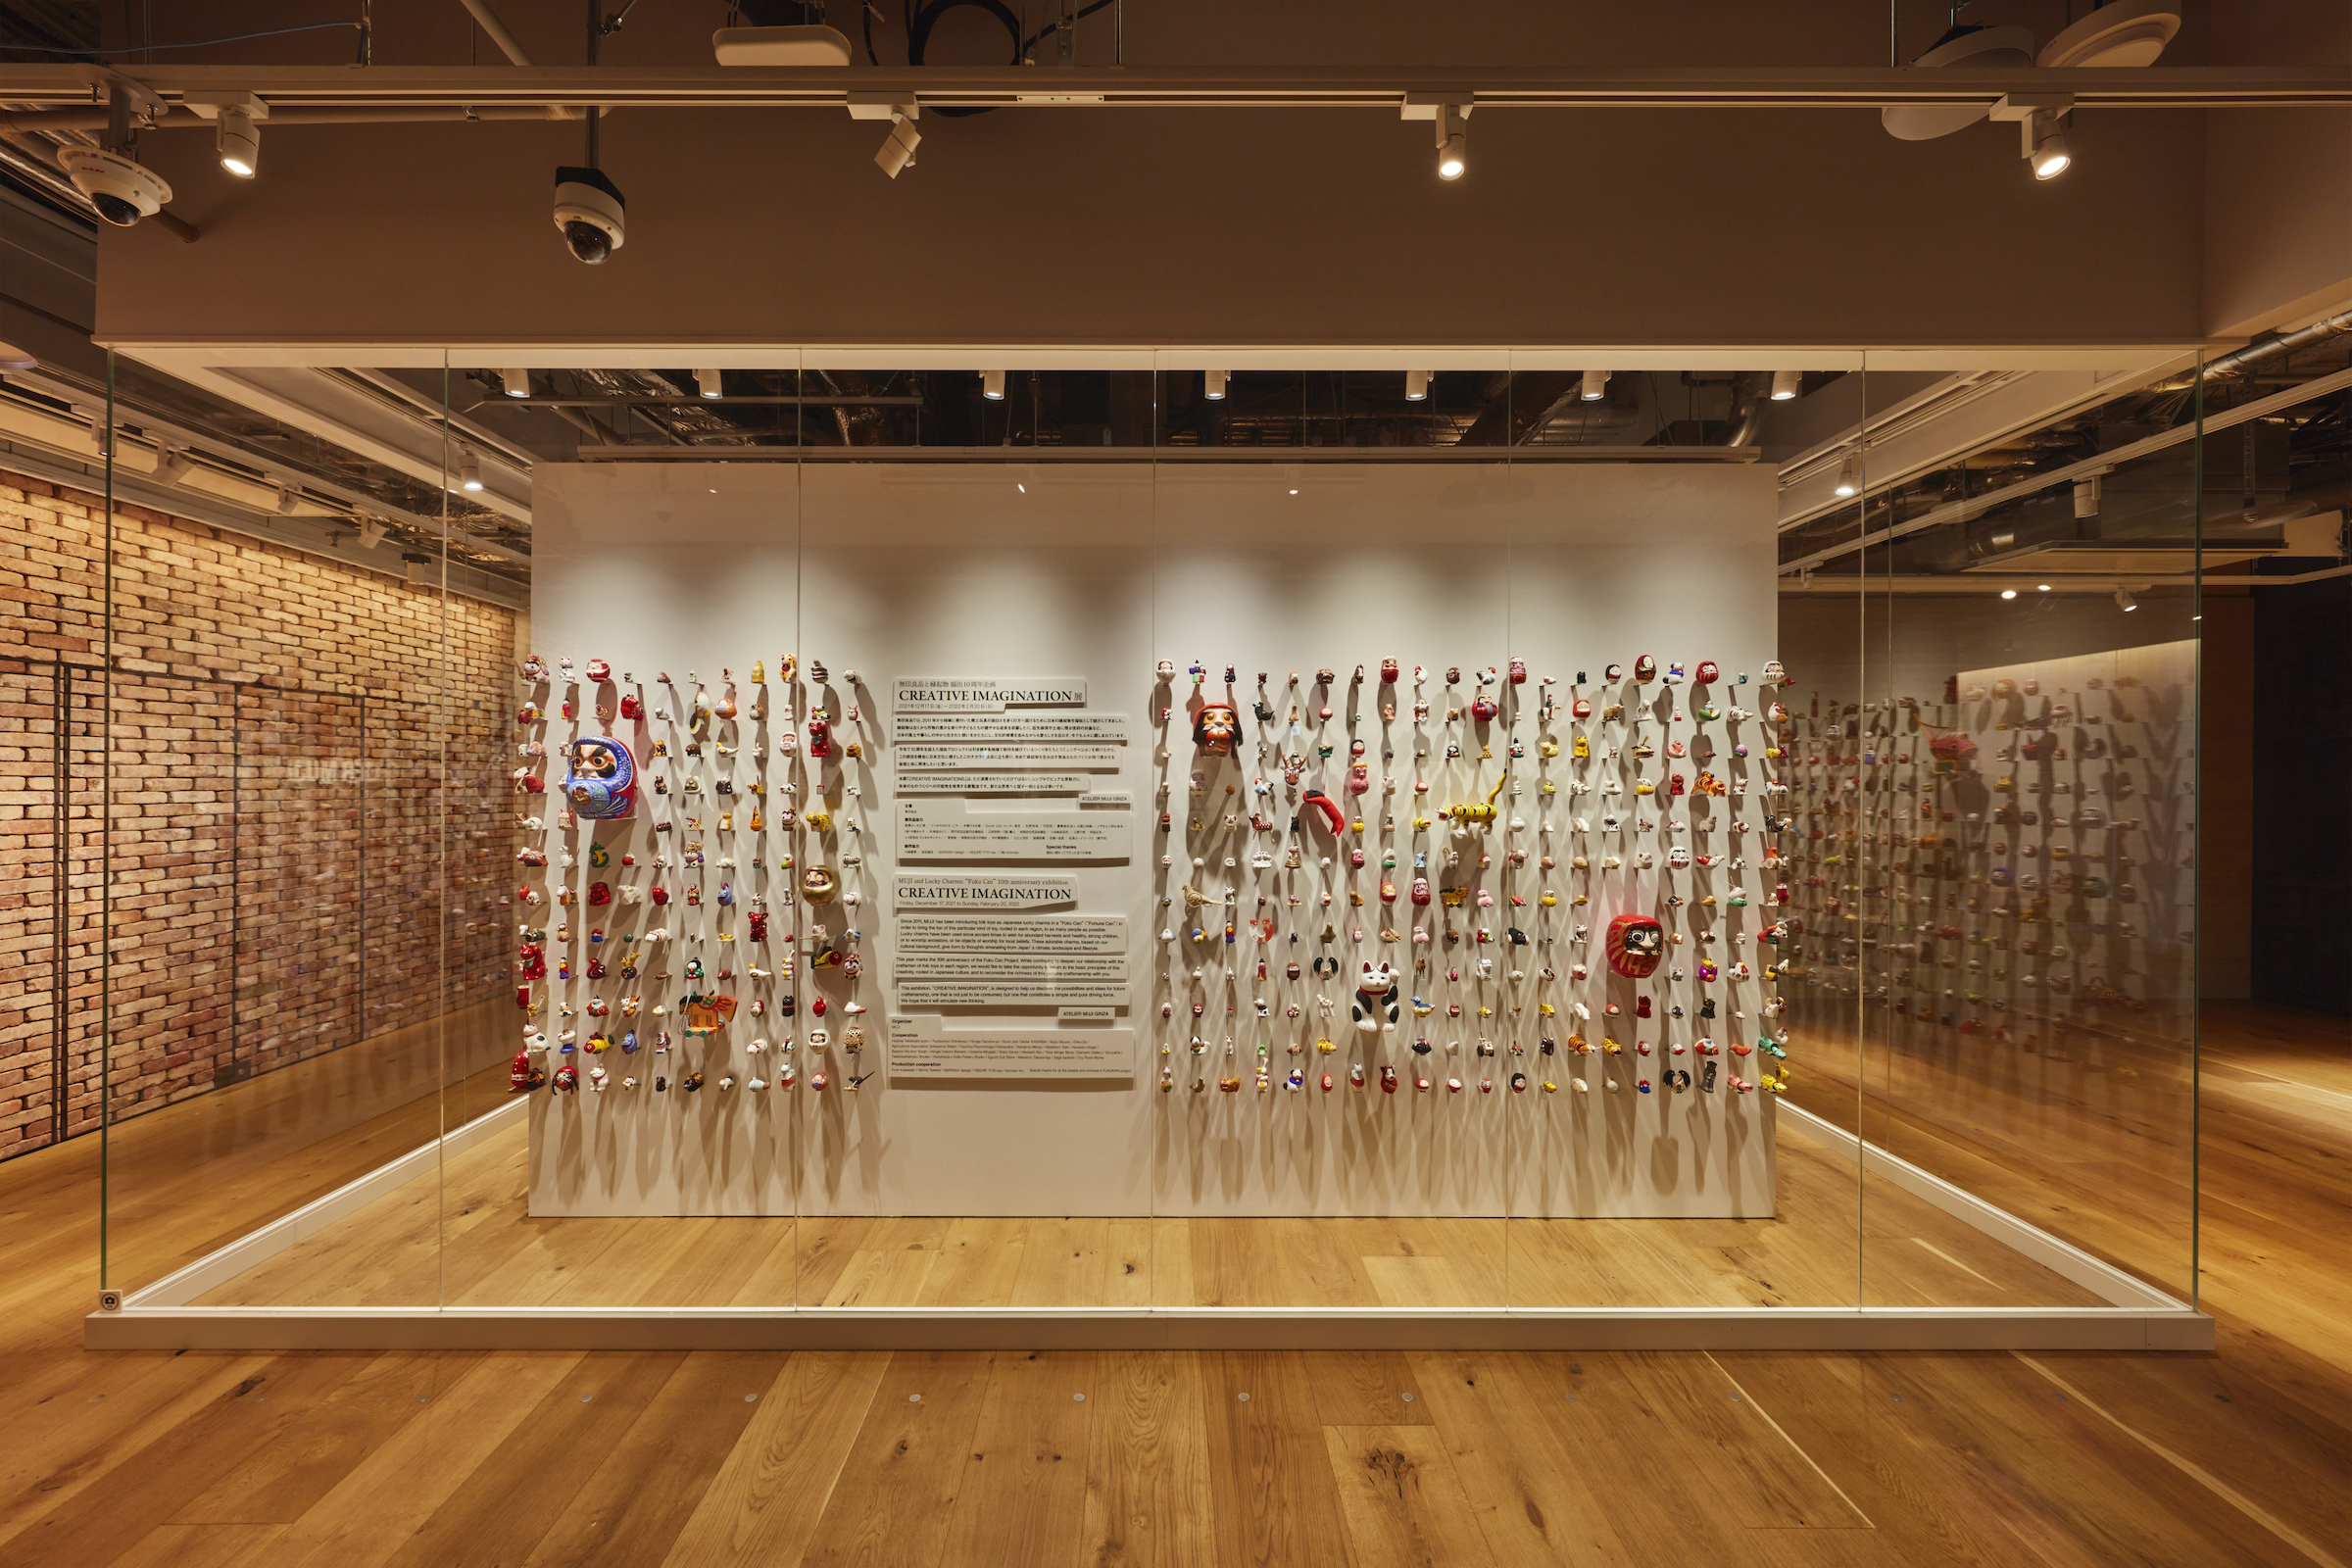 MUJI and Lucky Charms: “Fuku Can” 10th anniversary exhibition CREATIVE IMAGINATION